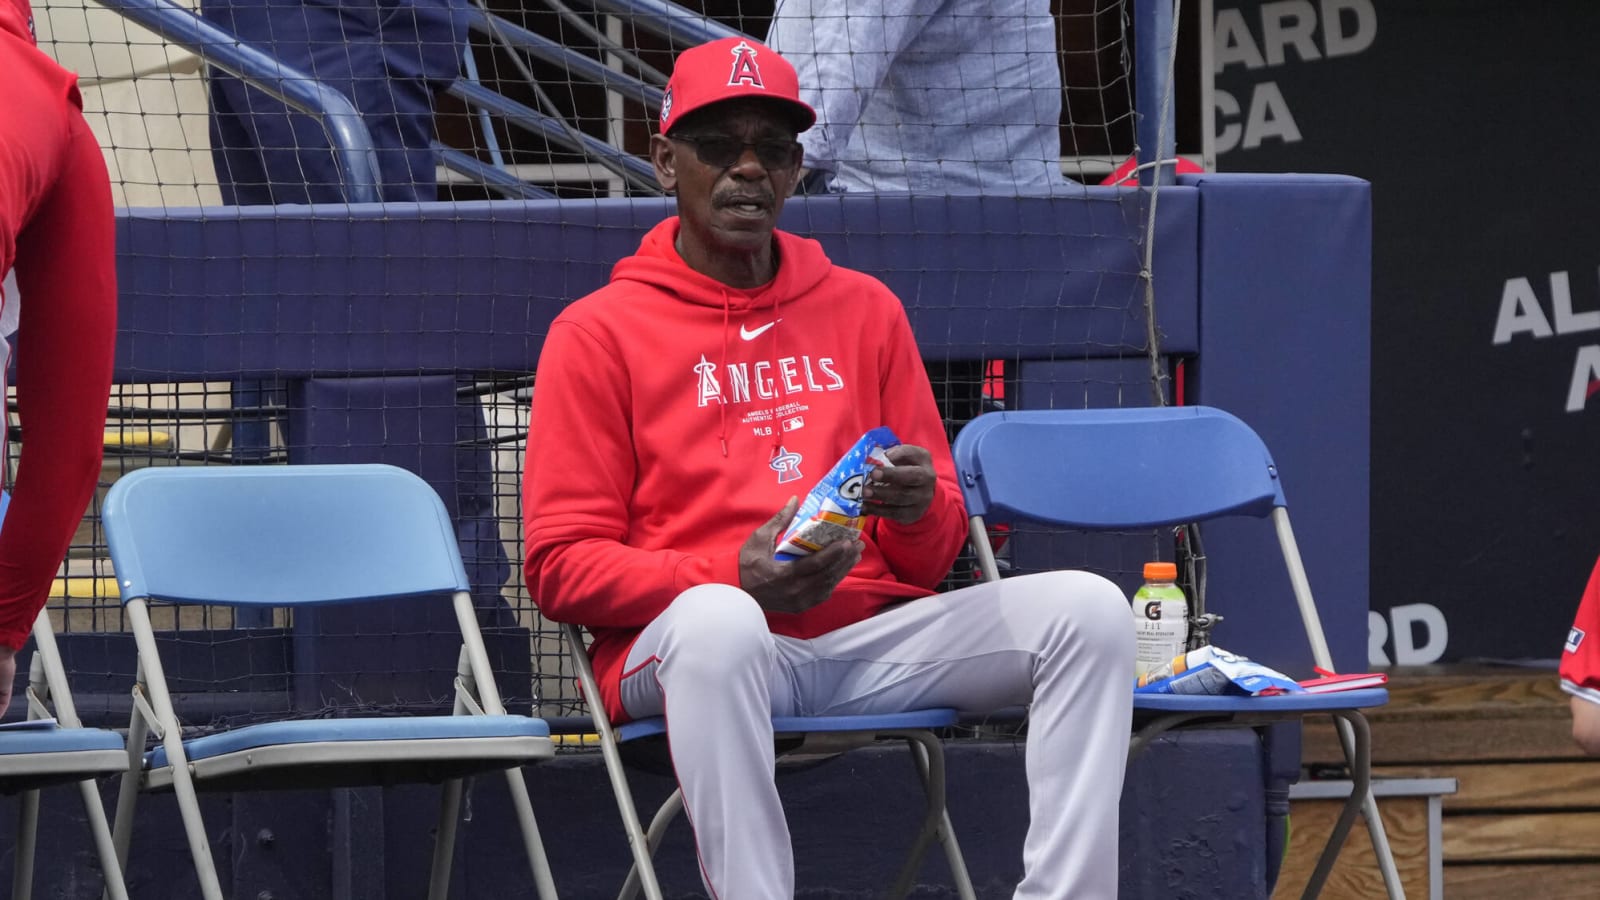  Ron Washington Praises Team For Fight In 13-Inning Loss To Rays